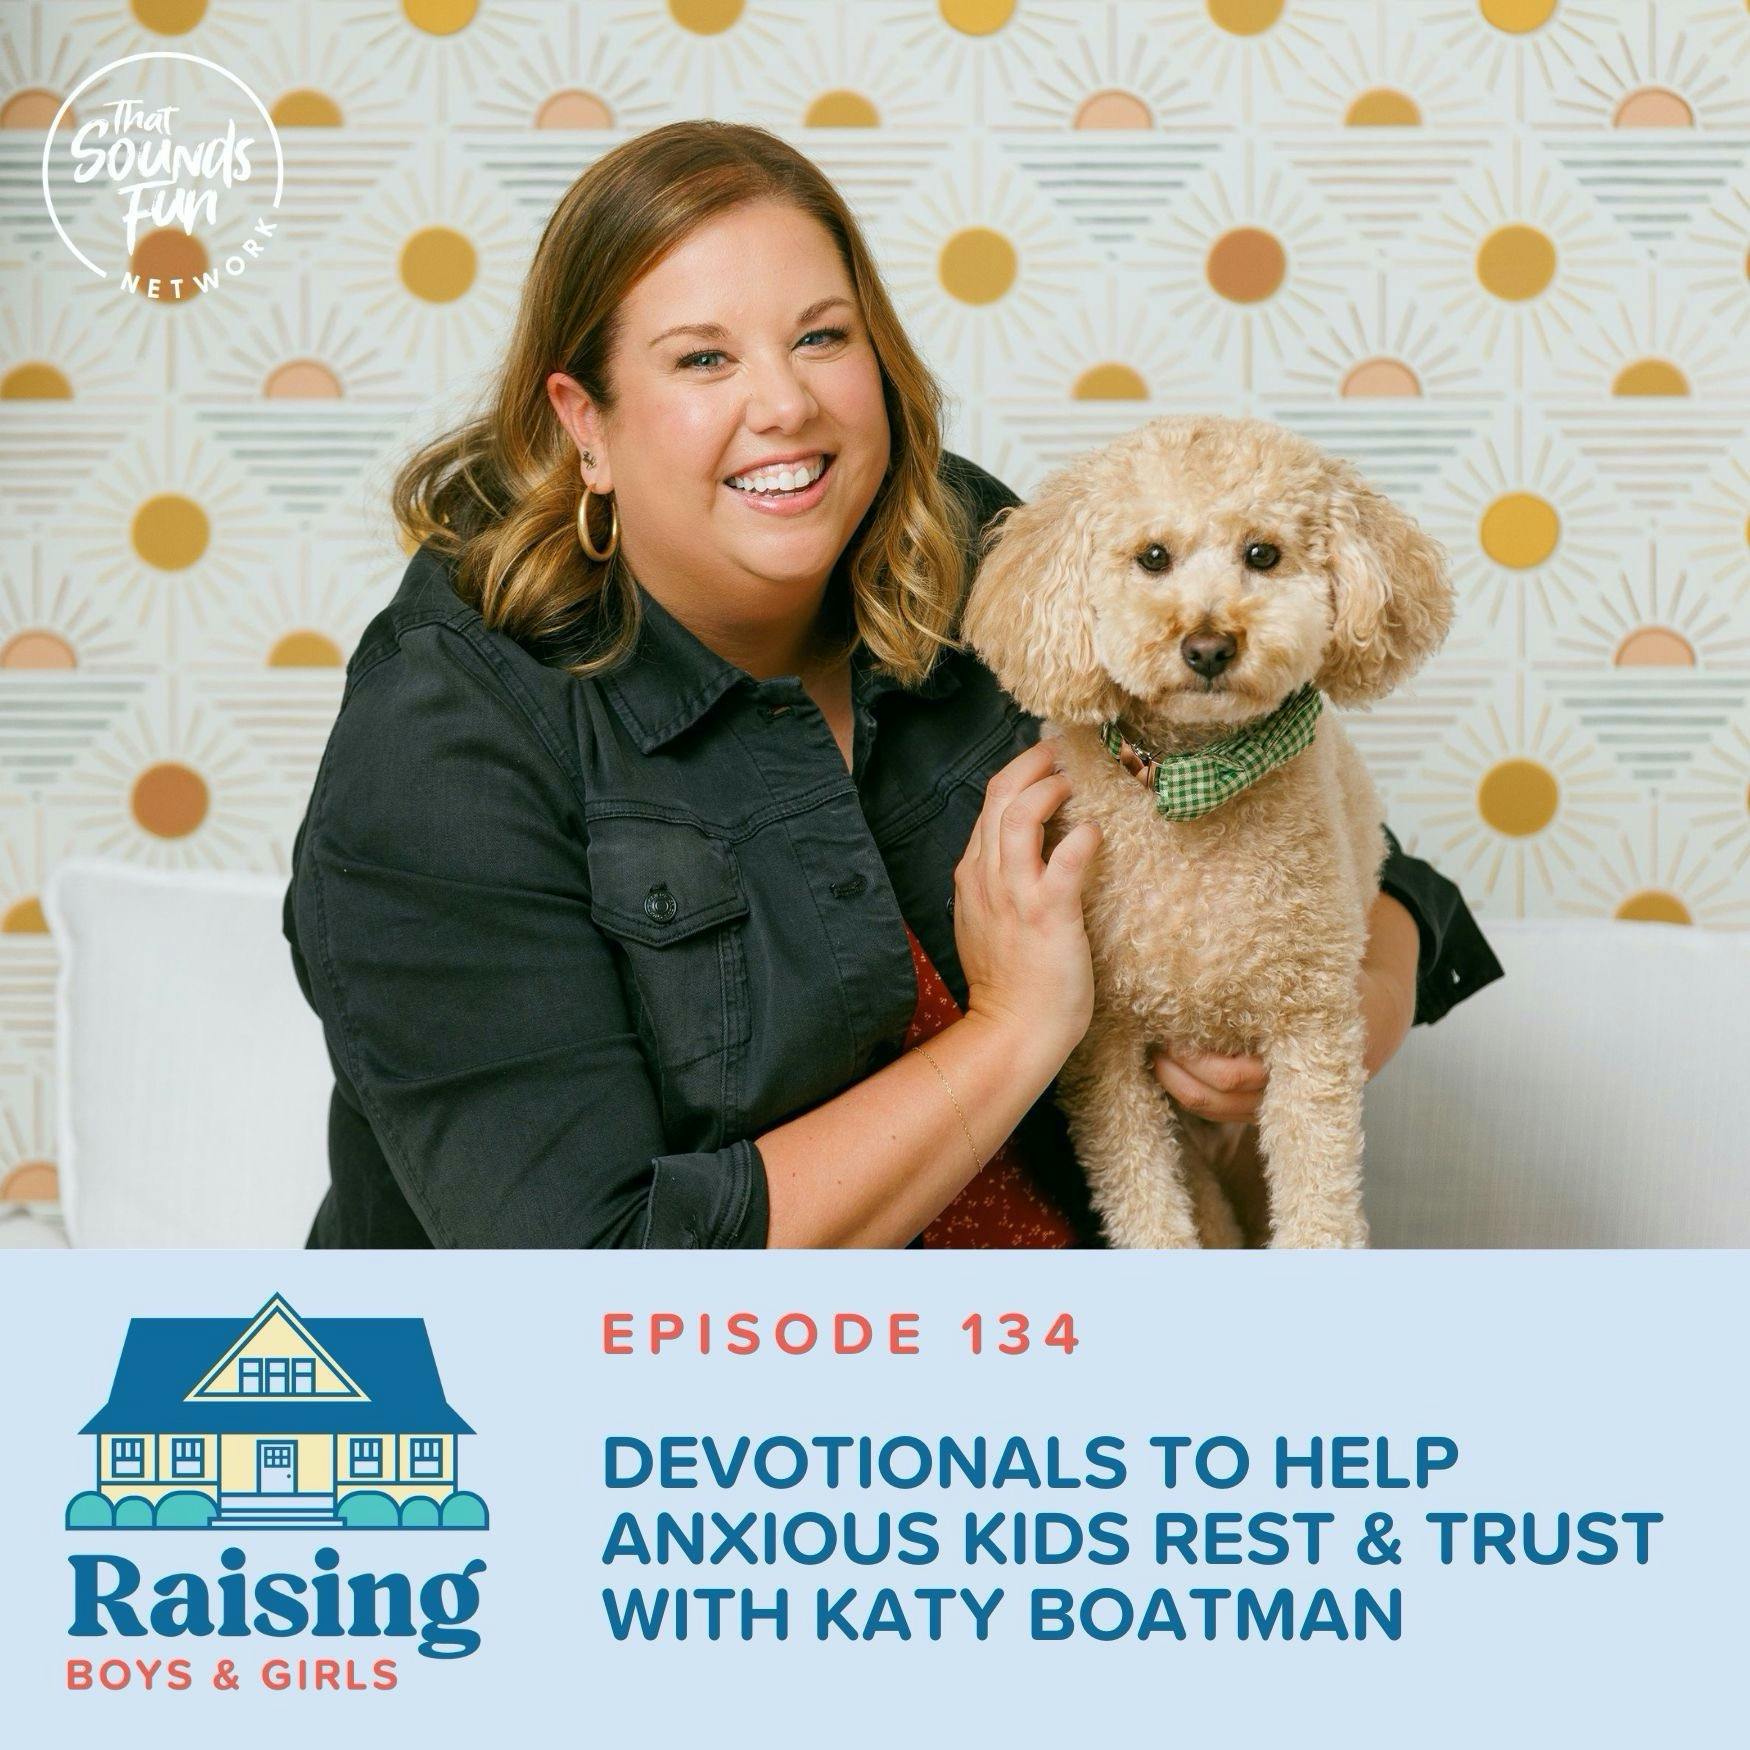 Episode 134: Devotionals to Help Anxious Kids Rest & Trust with Katy Boatman